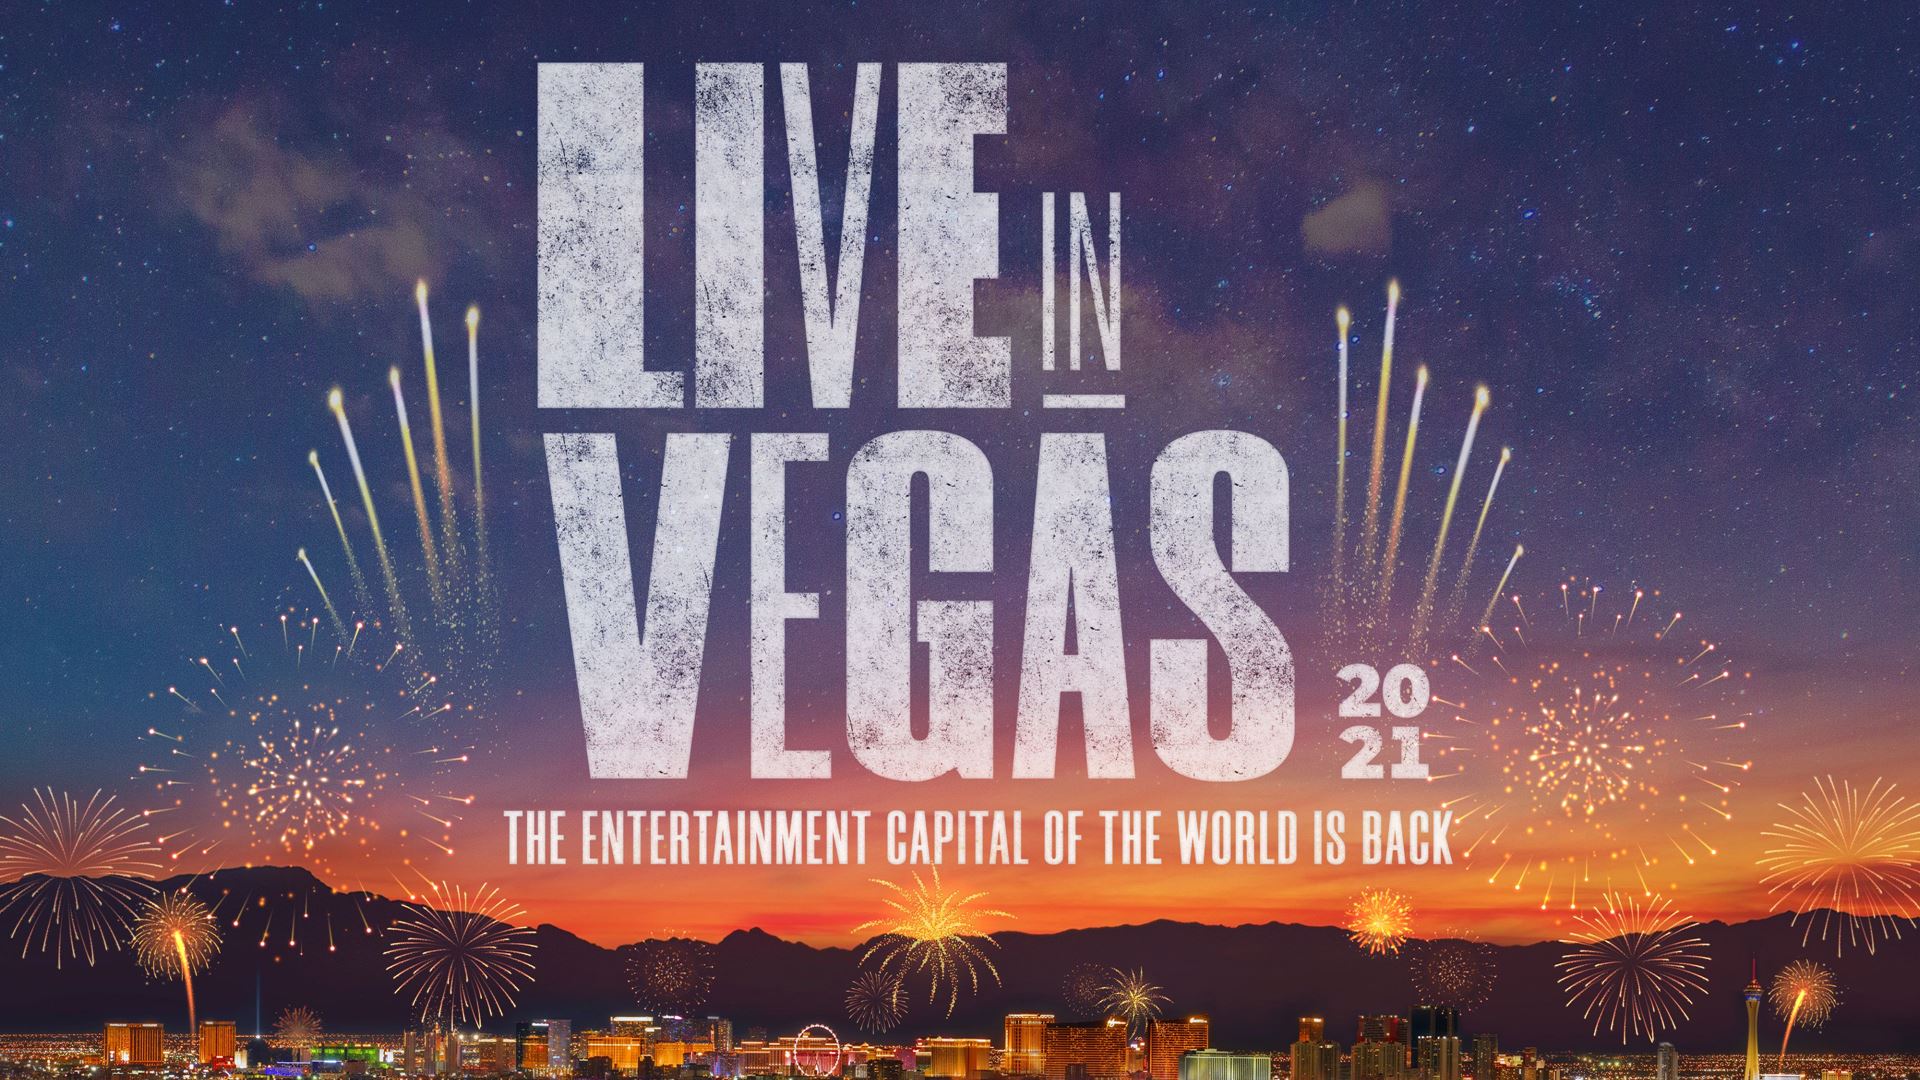 Vegas is Back! Destination will Celebrate with Independence Day